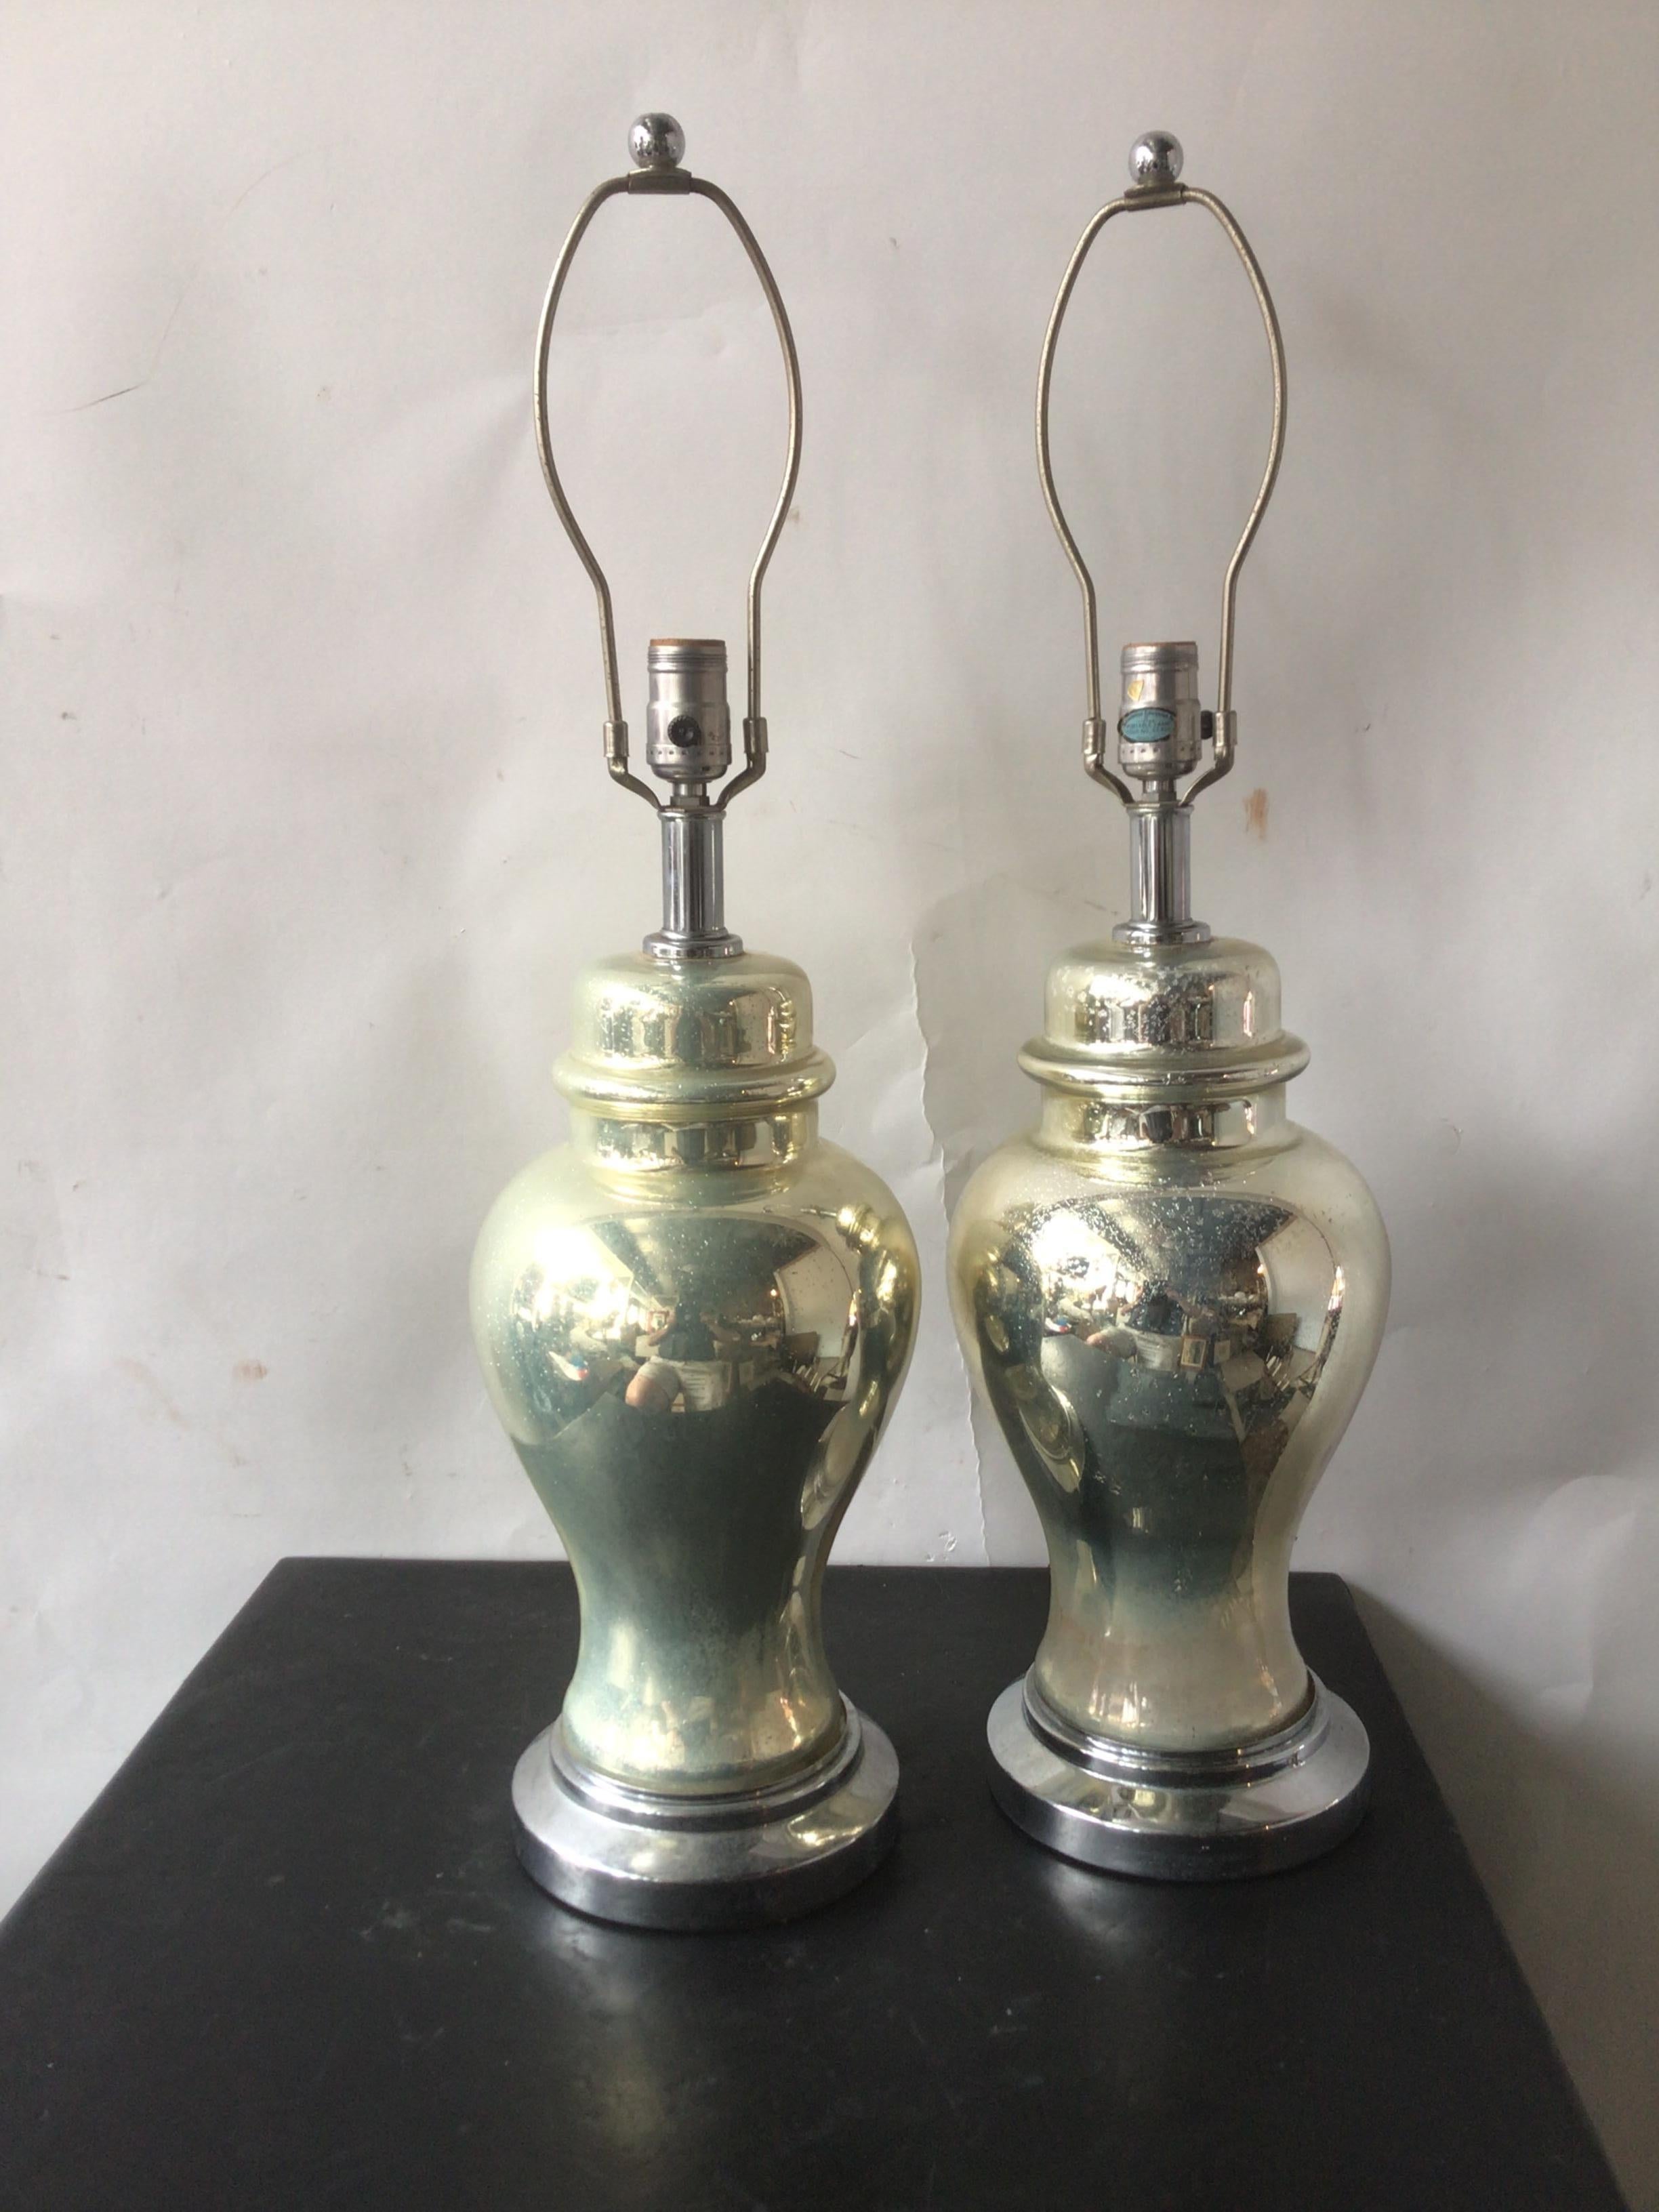 Pair of 1960s Mercury Glass Ginger Jar Lamps by Tyndale In Fair Condition For Sale In Tarrytown, NY